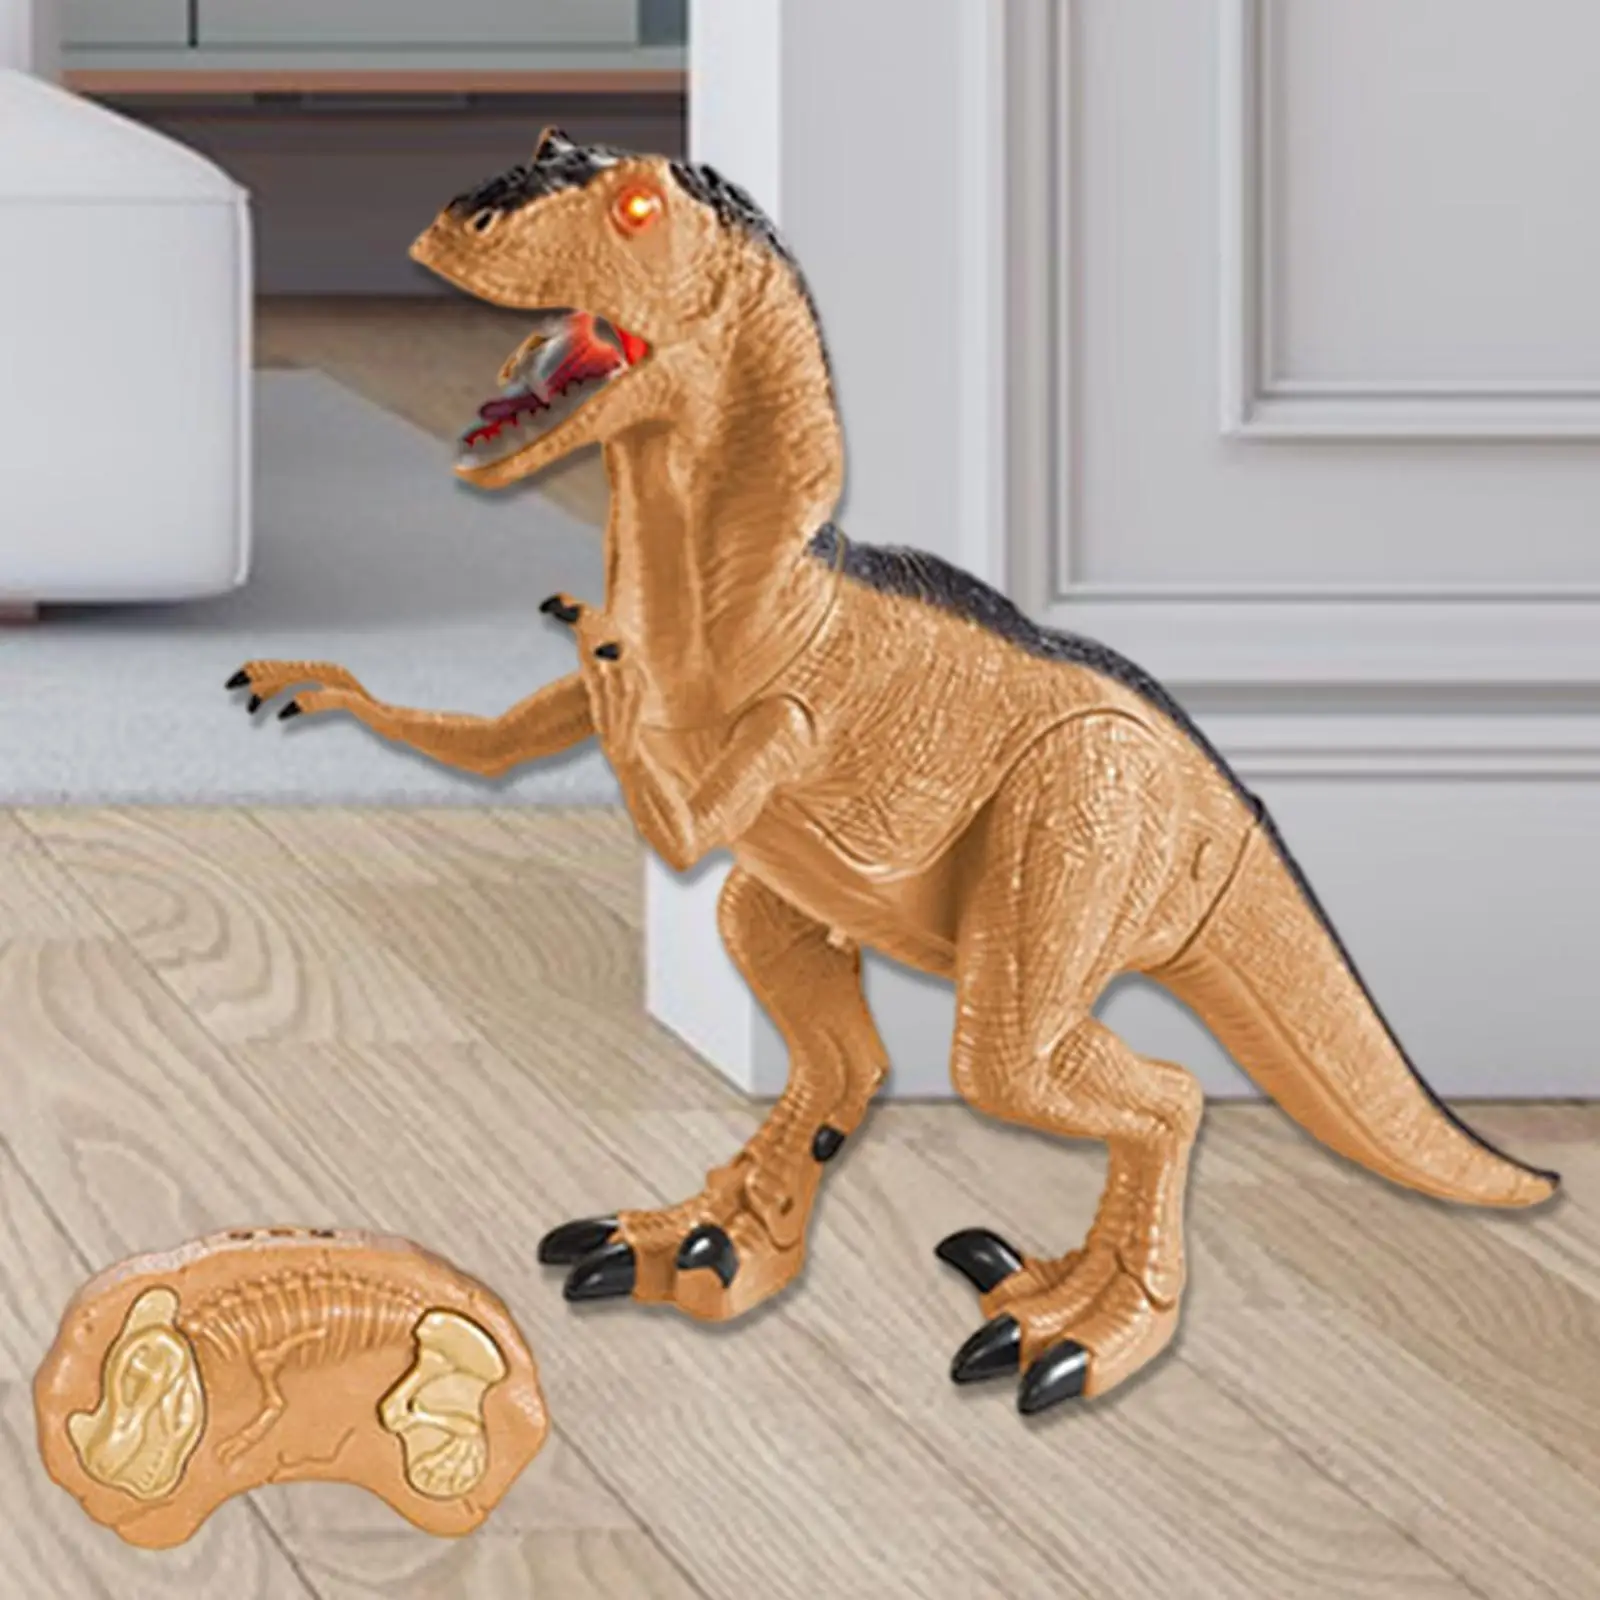 Remote Control Walking Dinosaur Toy Walking Movement for Kids 4 5 6 7 Years Old